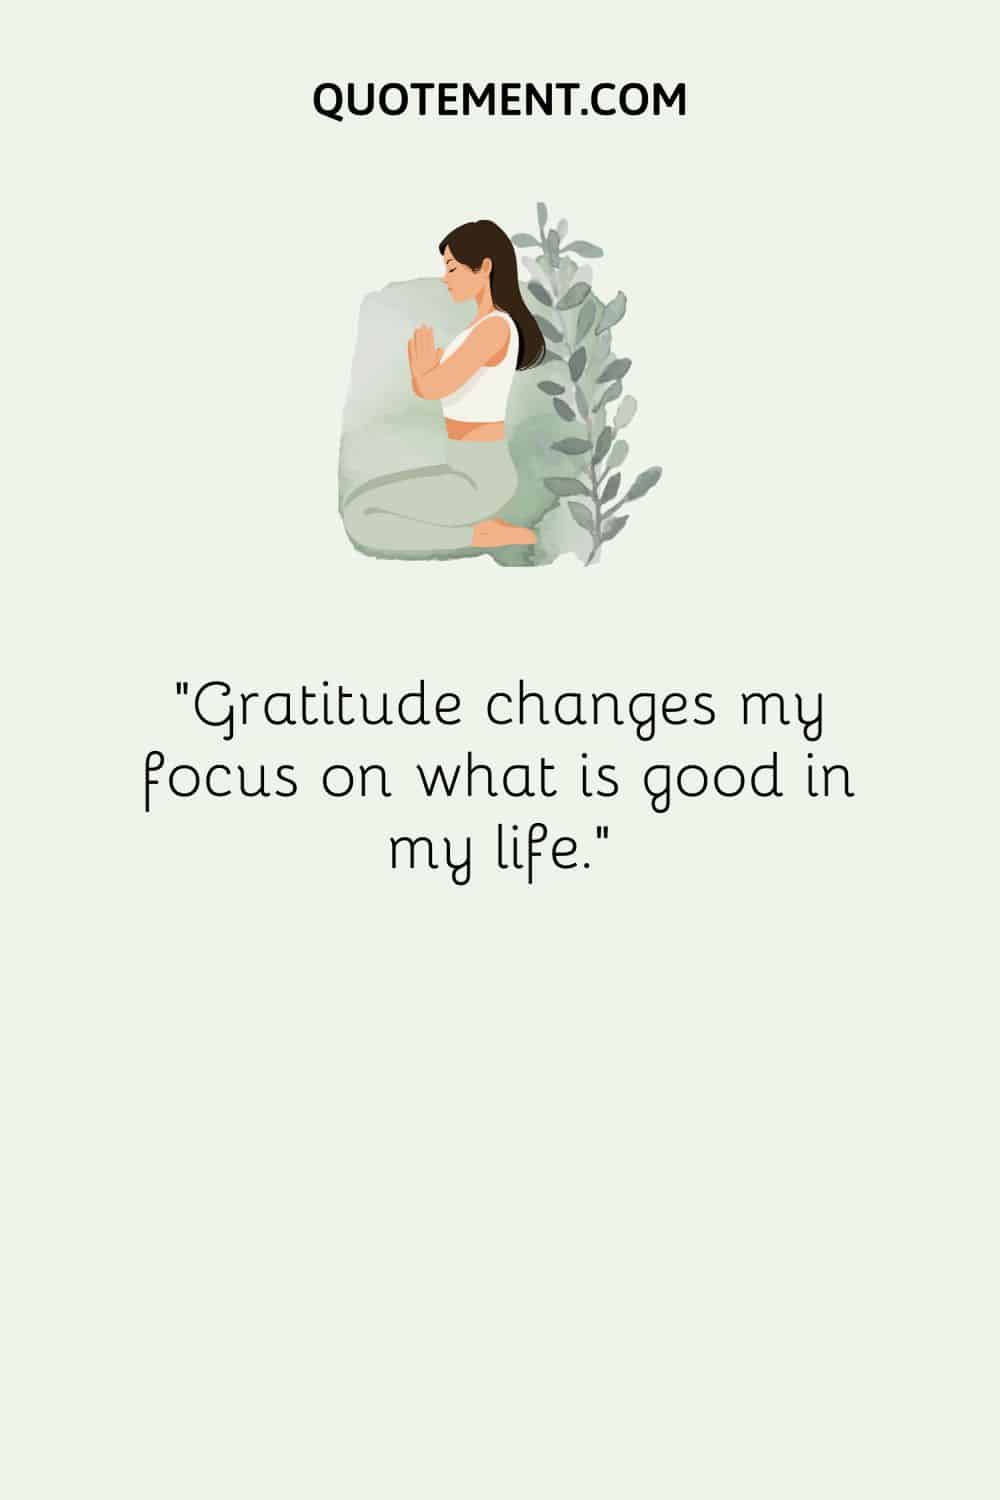 Gratitude changes my focus on what is good in my life